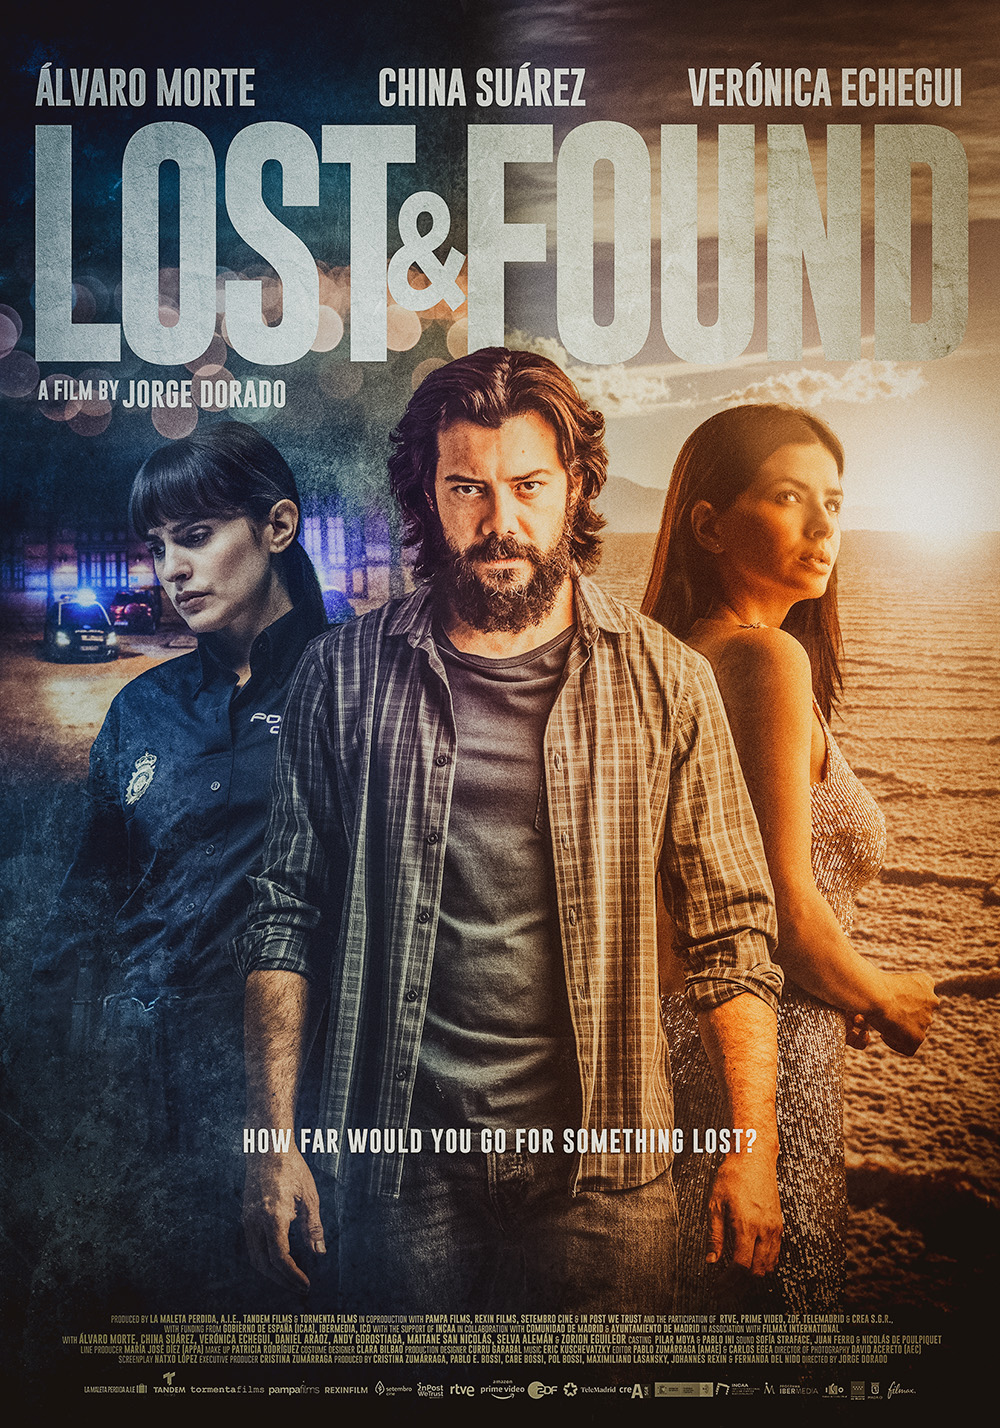 Lost & Found Plot Synopsis